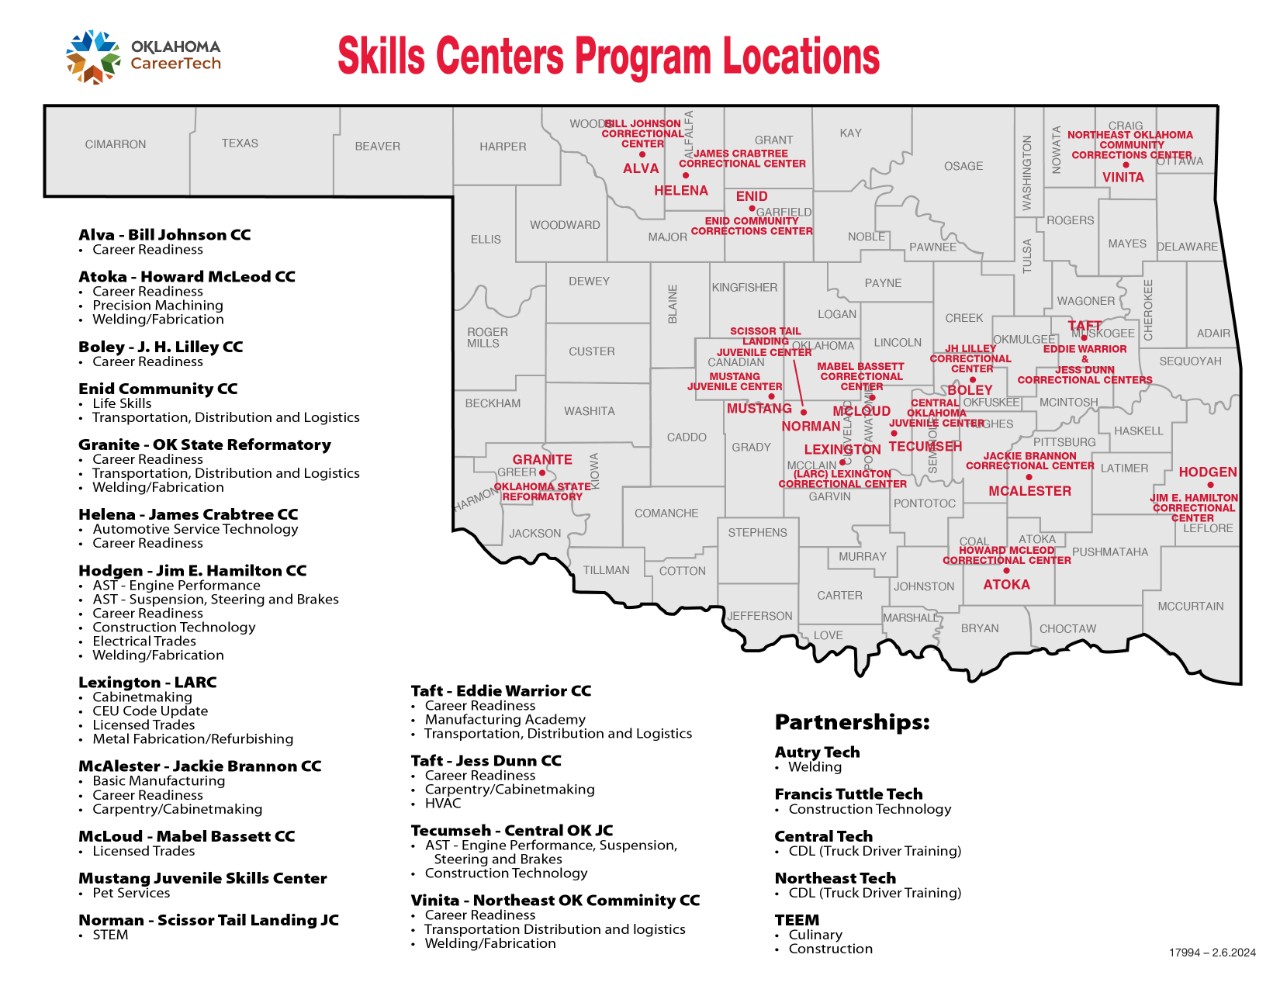 Map of Skills Centers locations